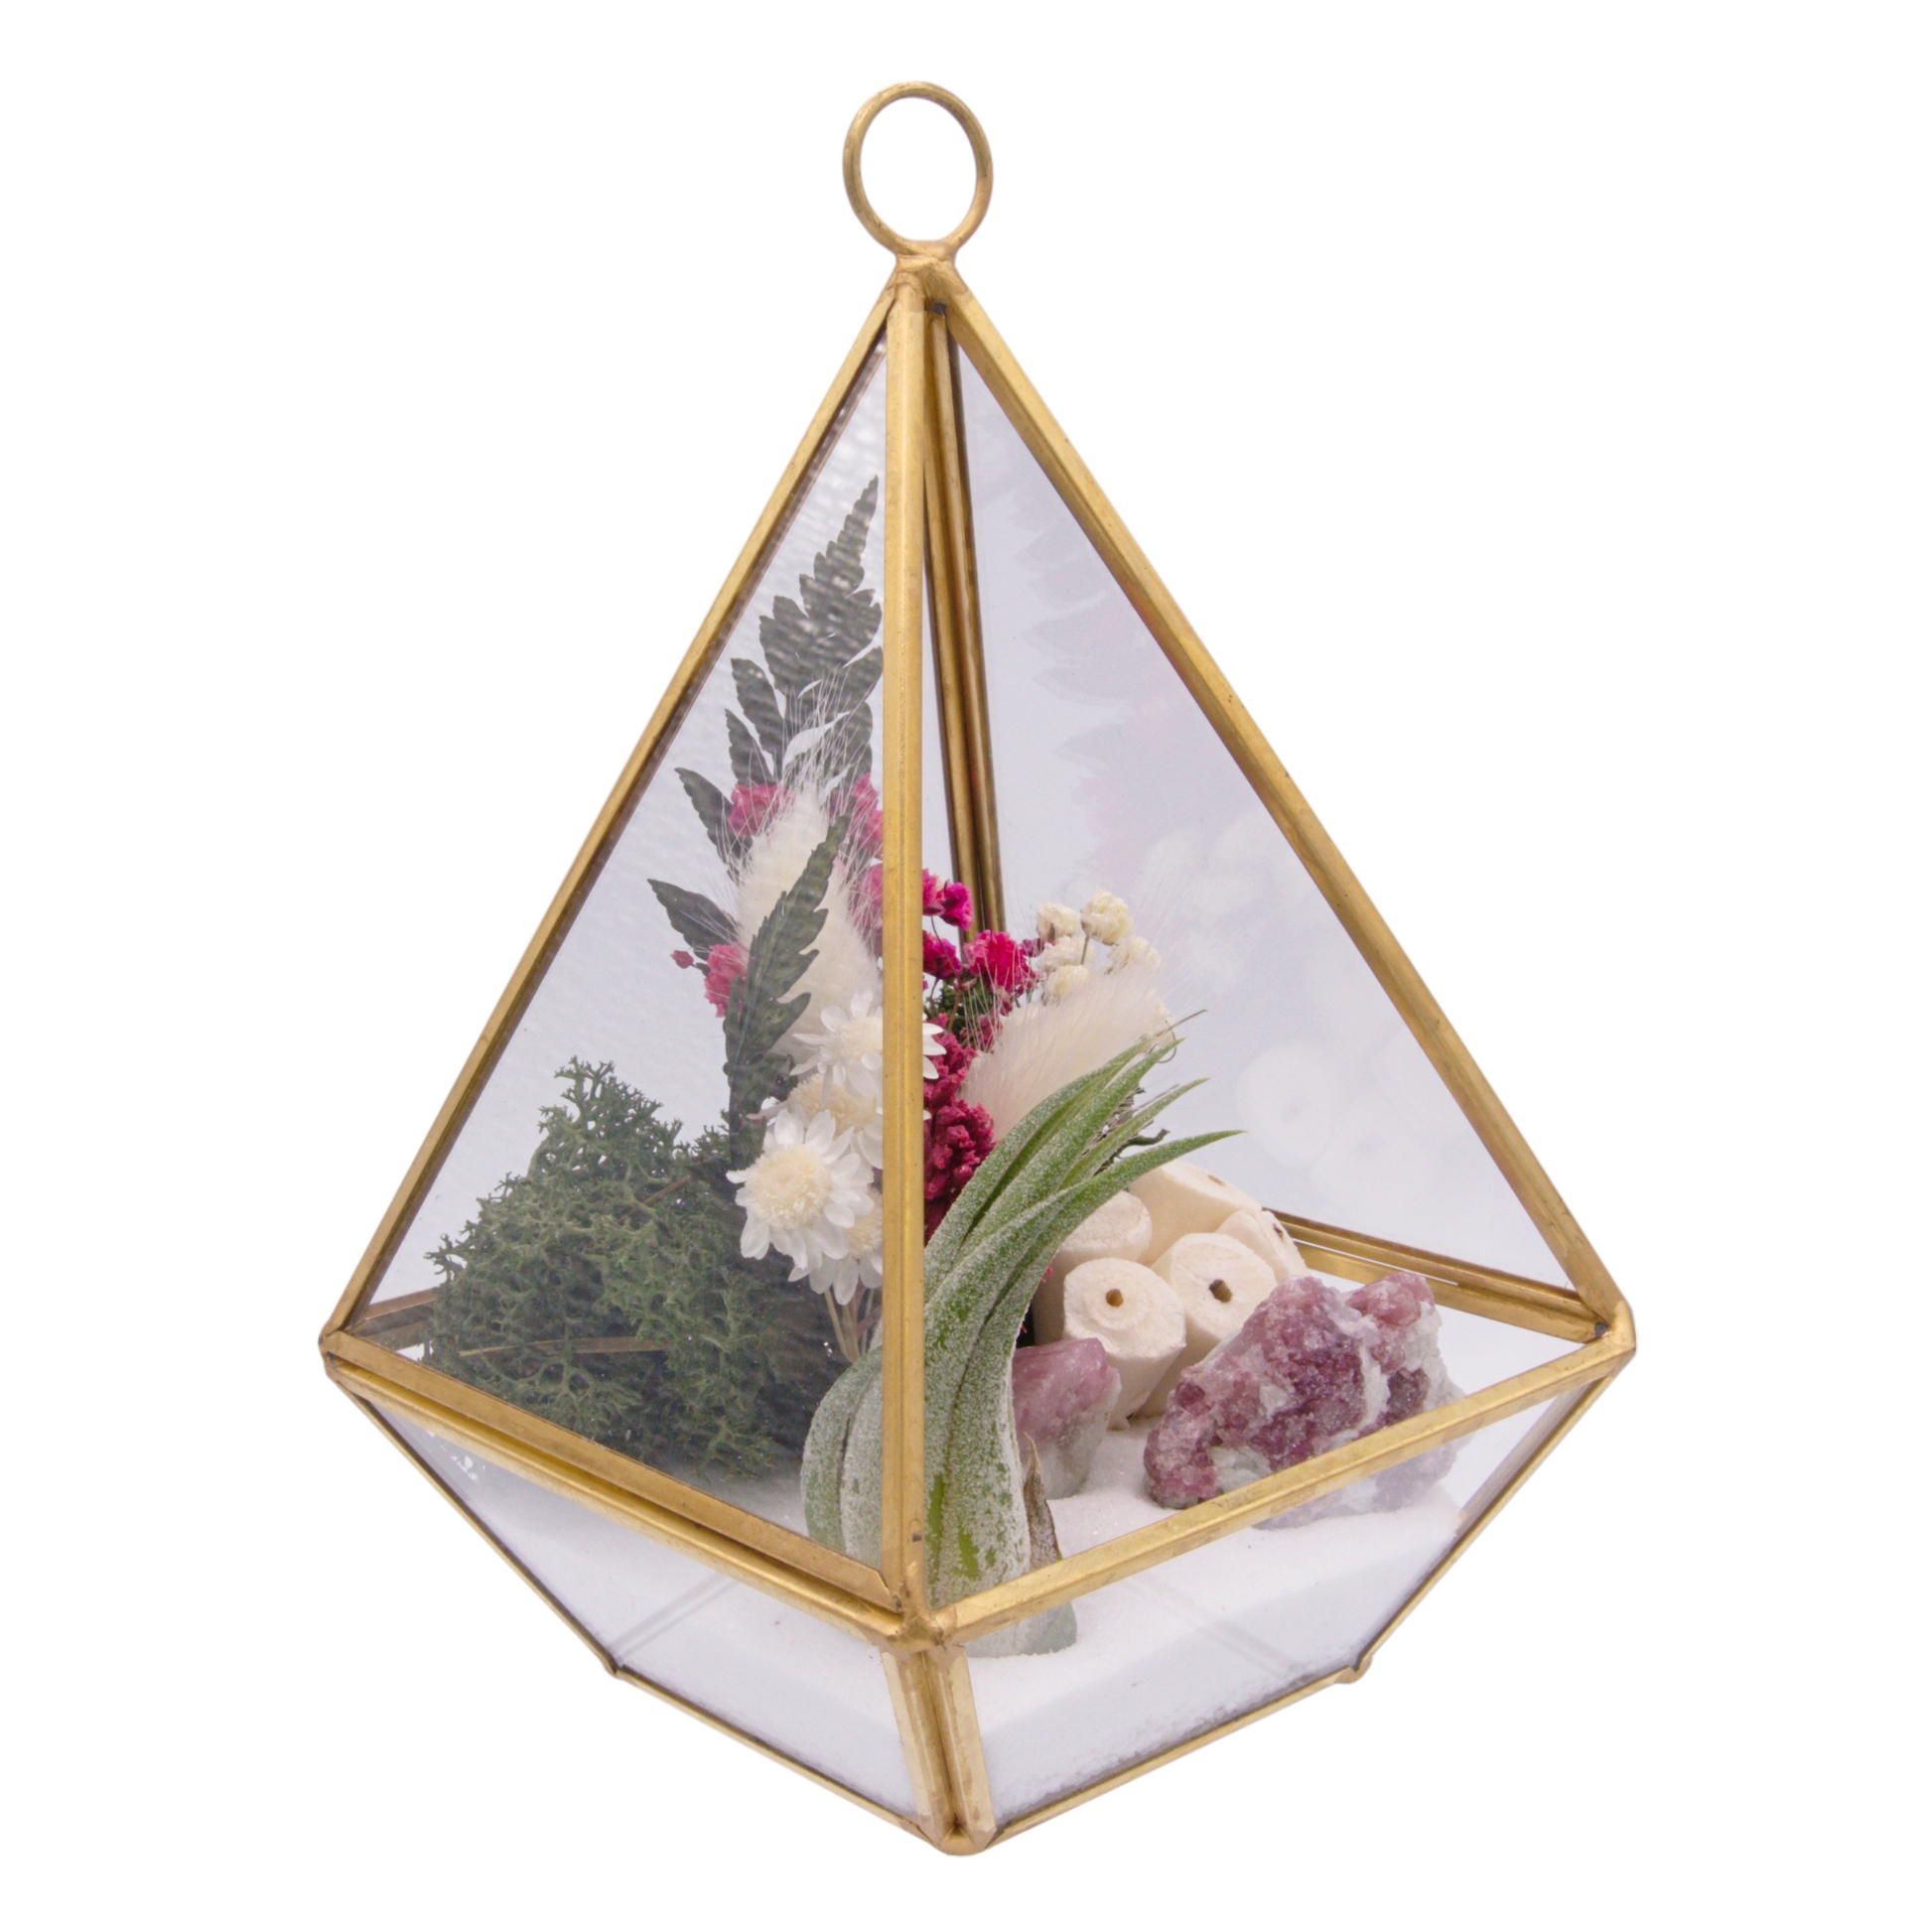 Victorian terrarium with sand, dried flowers, pink tourmaline crystals and an airplant